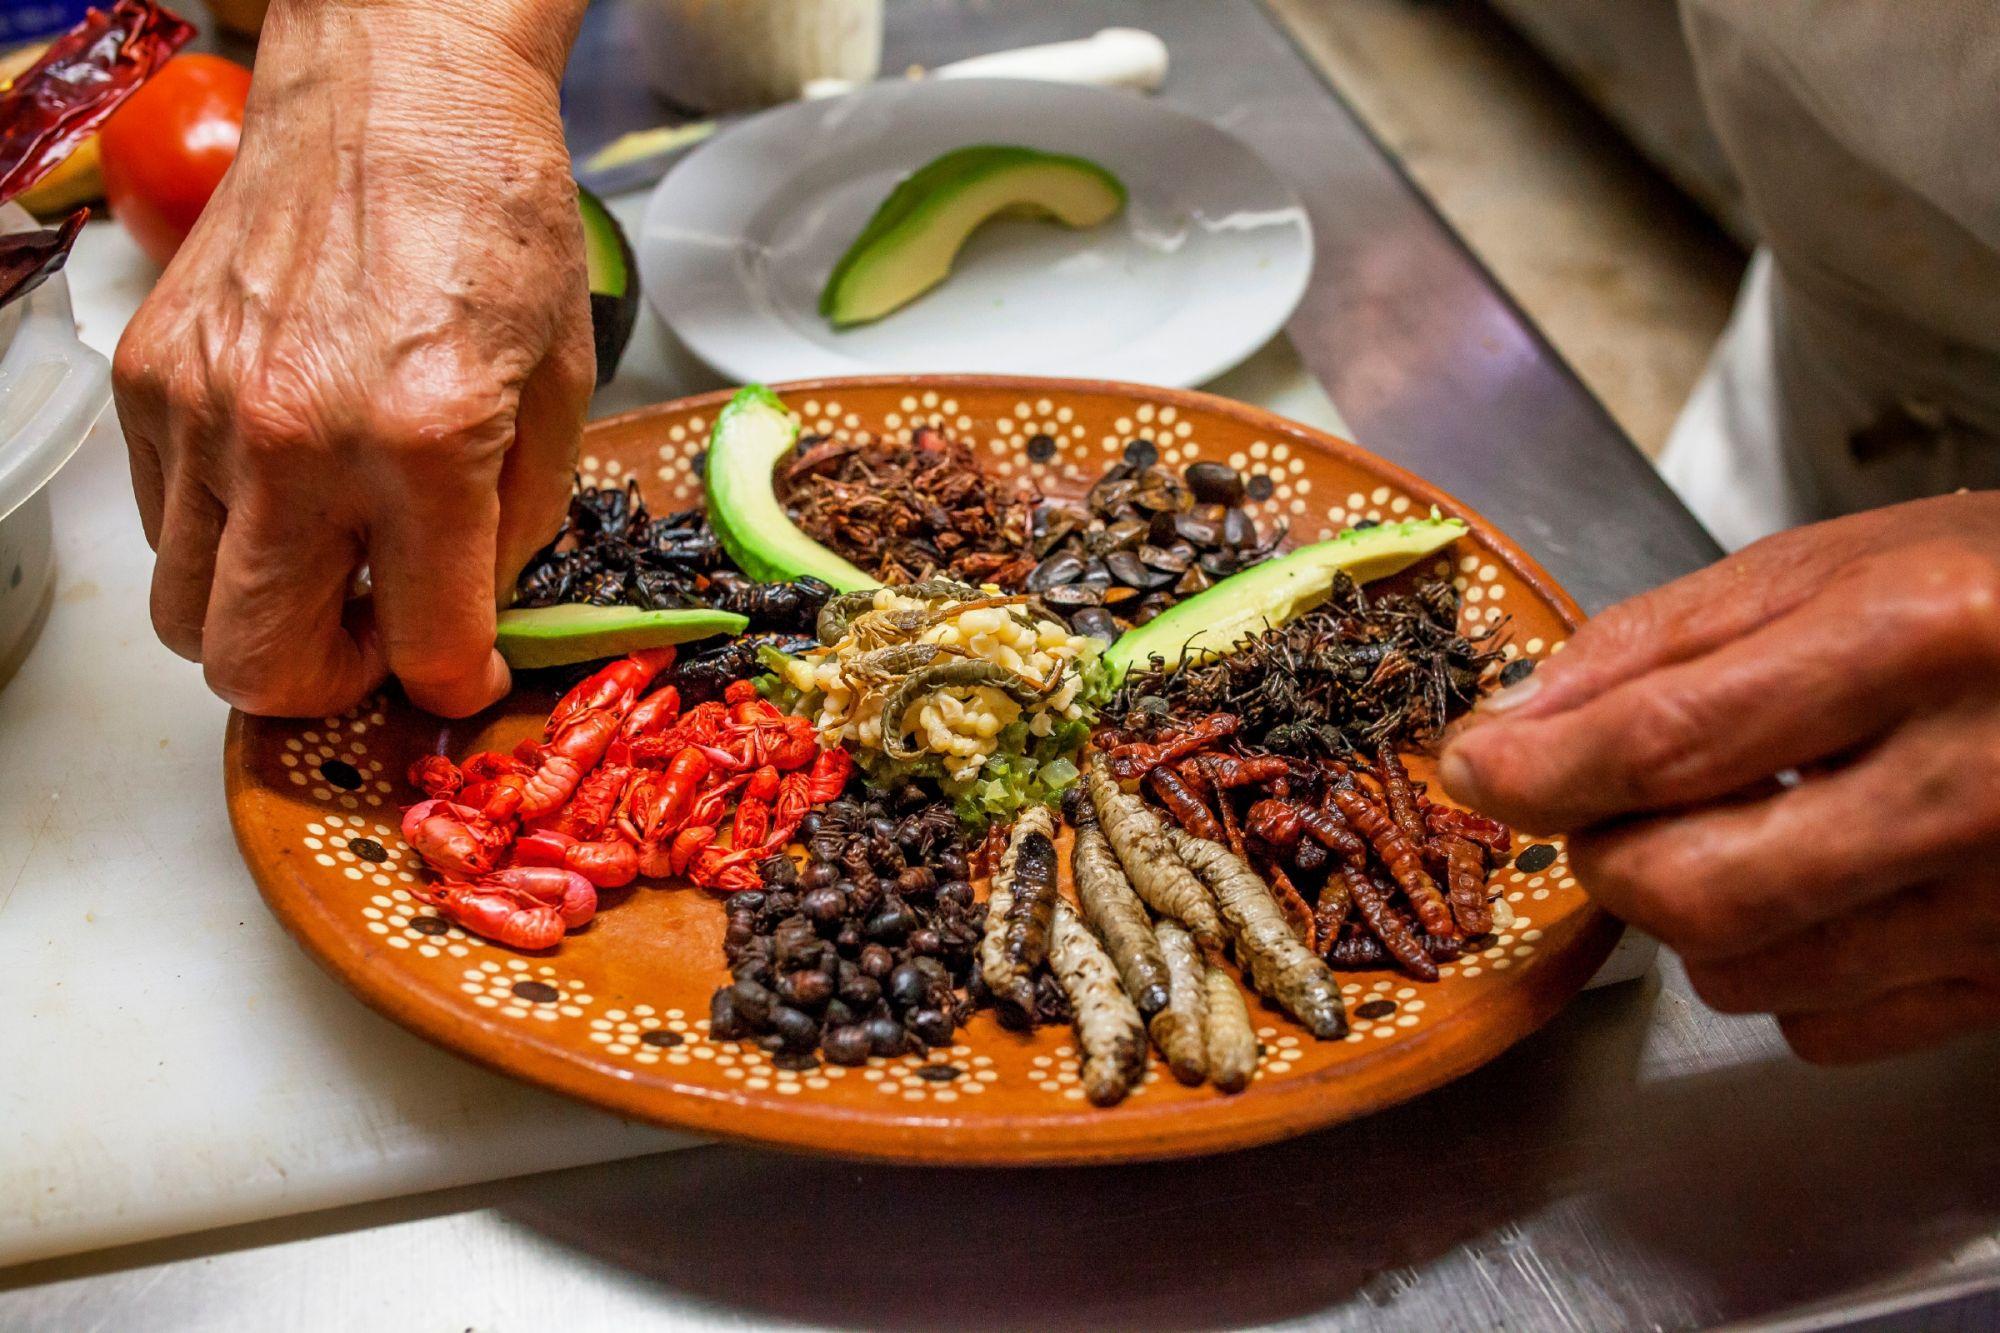 If you are fond of insects, here are 7 places to eat them